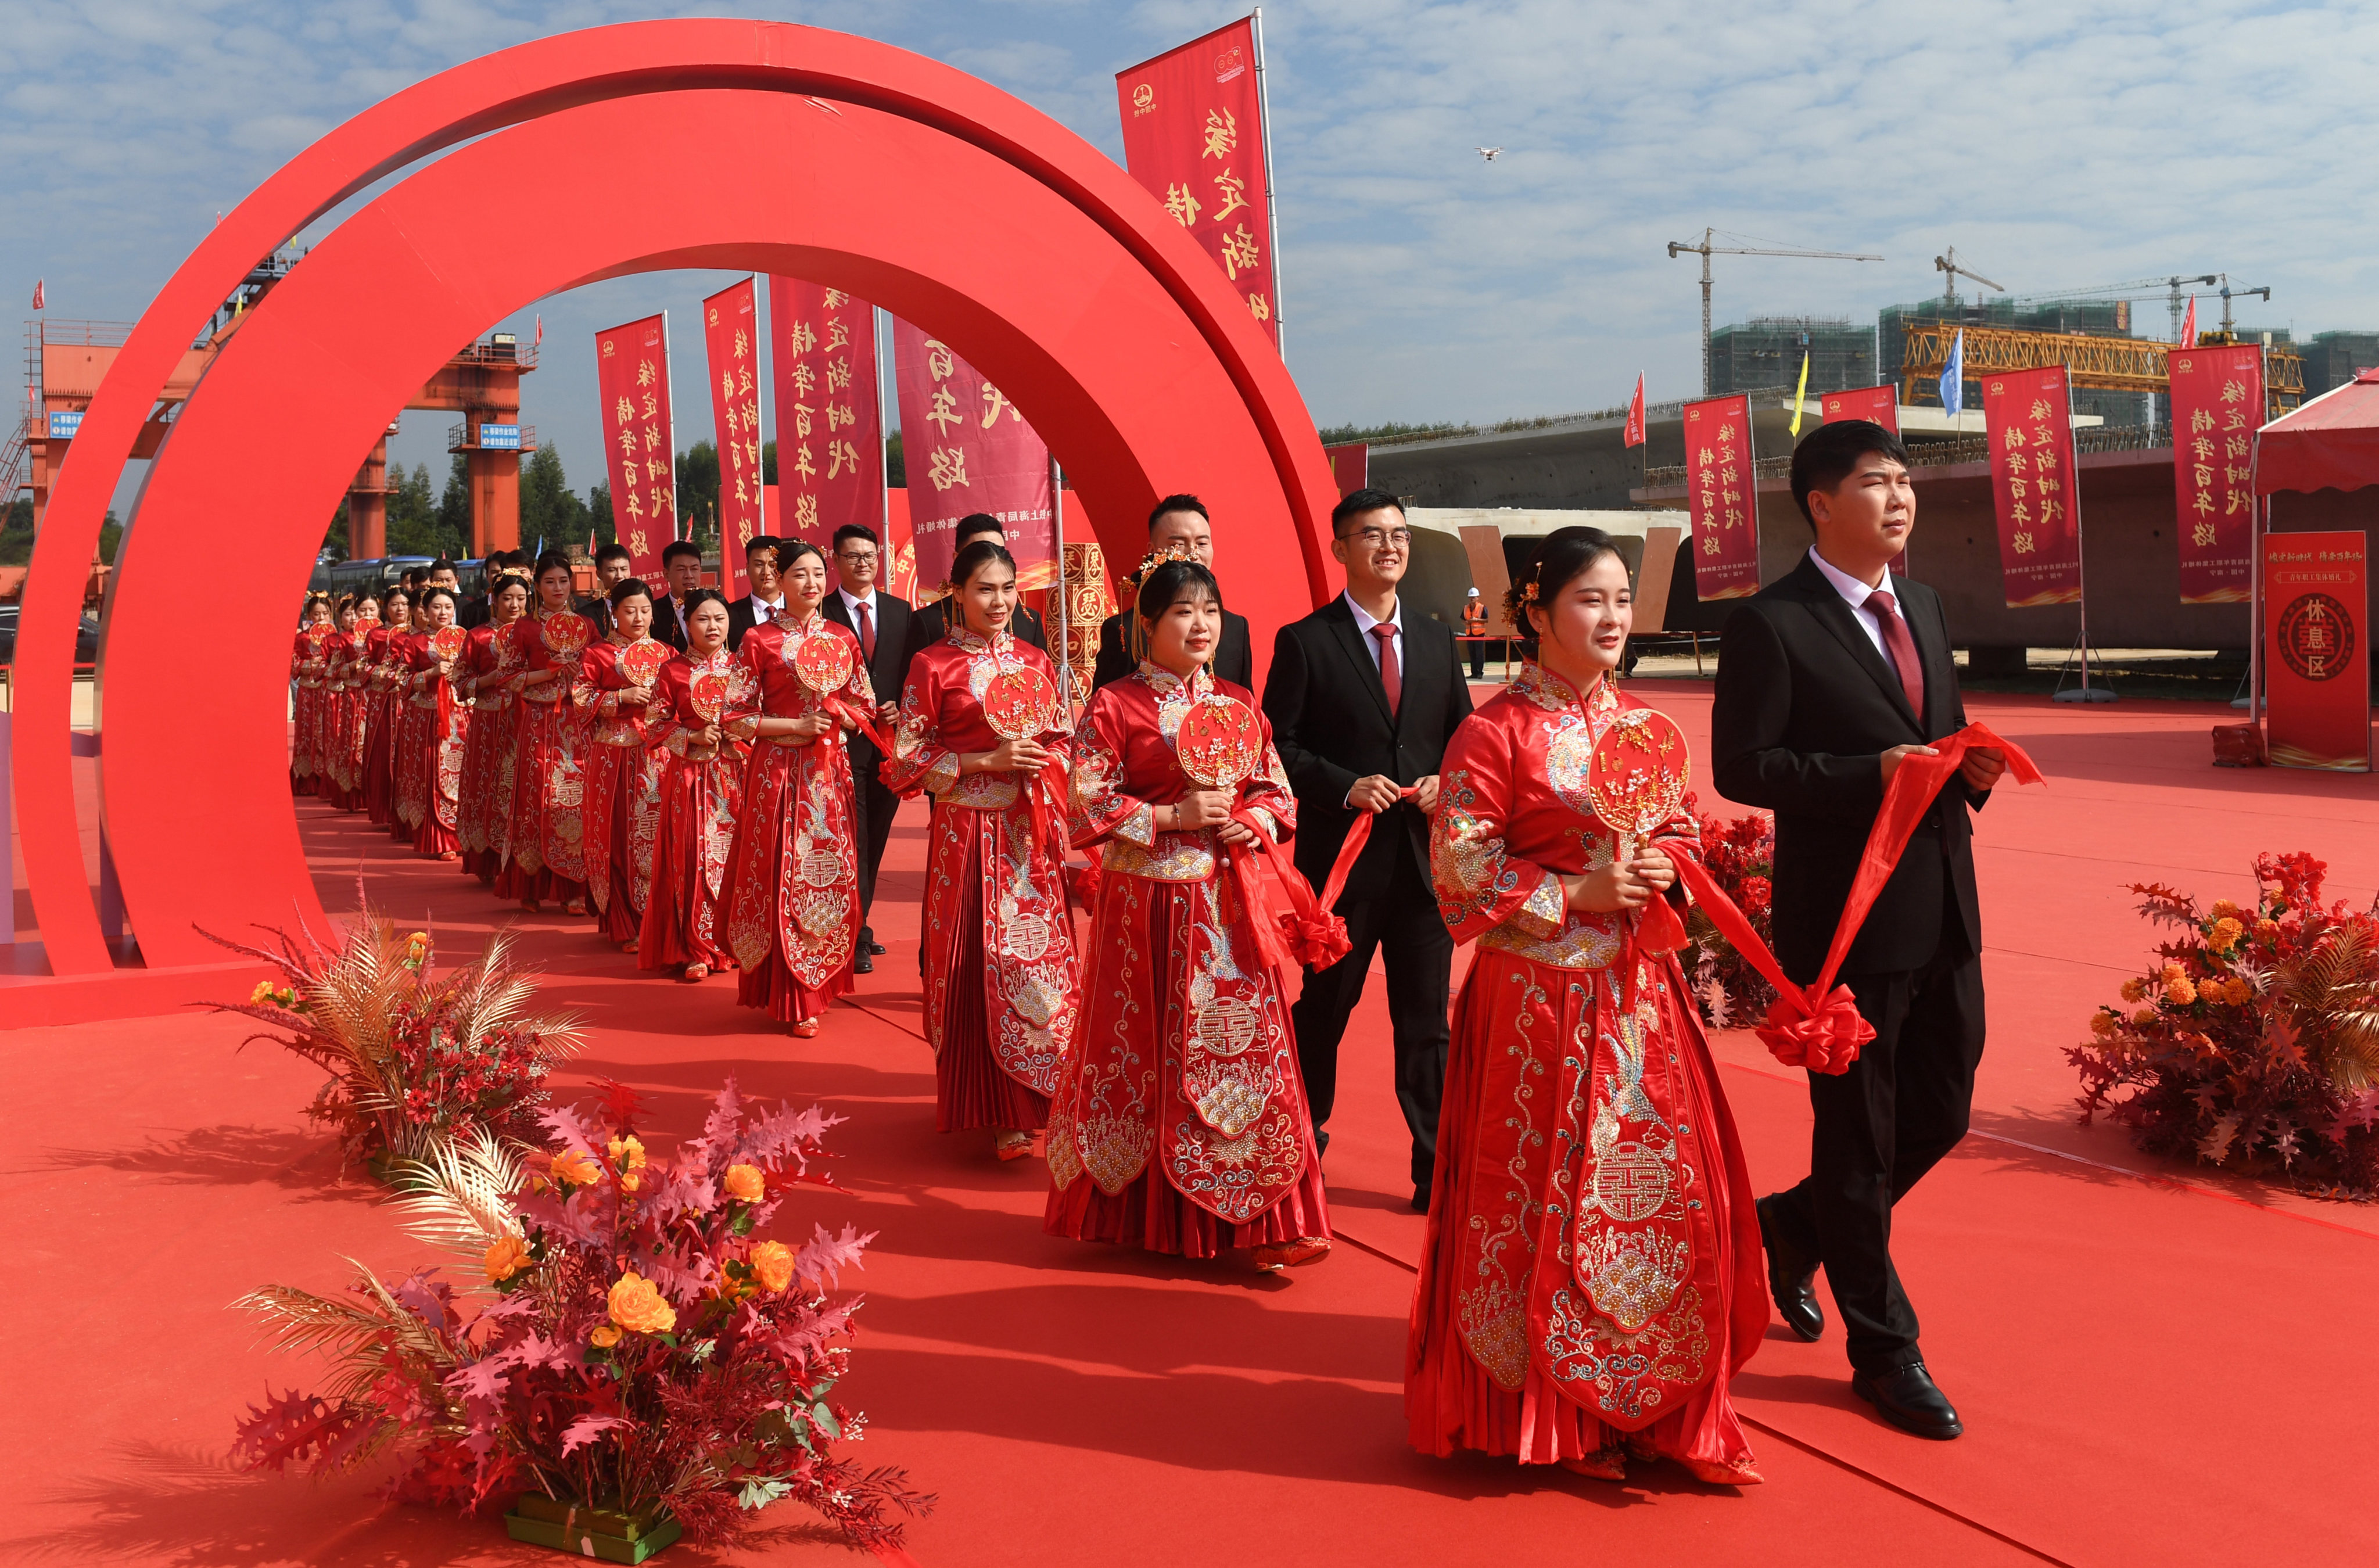 China is grappling with a declining marriage rate and birth rate. Photo: Xinhua